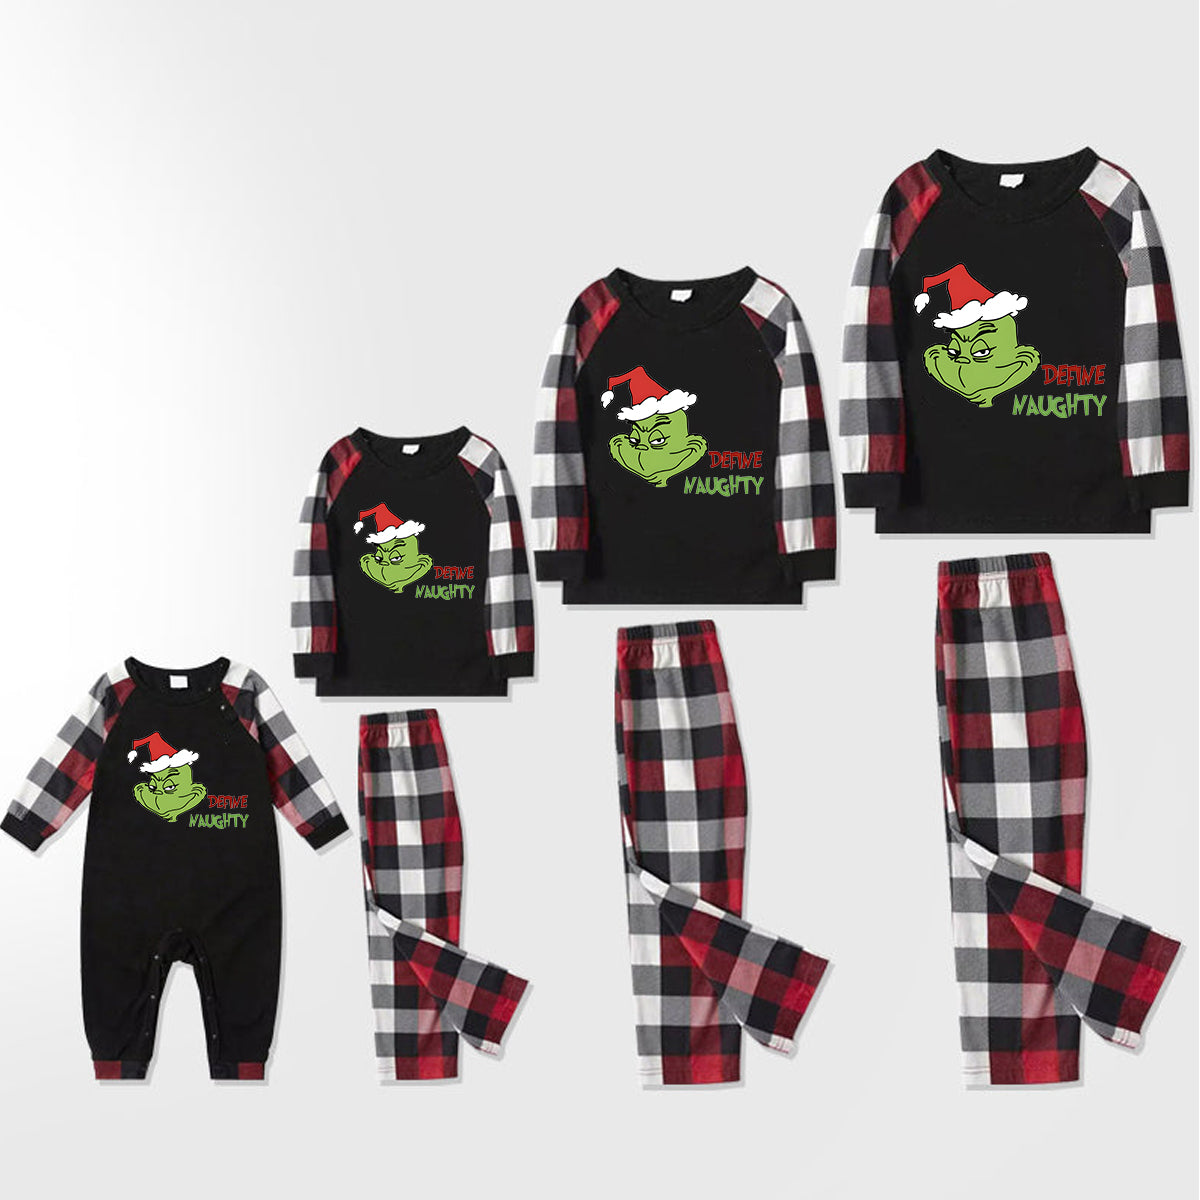 Christmas 'Define Naughty' Letter Print Patterned Casual Long Sleeve Sweatshirts Contrast Tops and Red & Black & White Plaid Pants Family Matching Pajamas Set With Dog Bandana